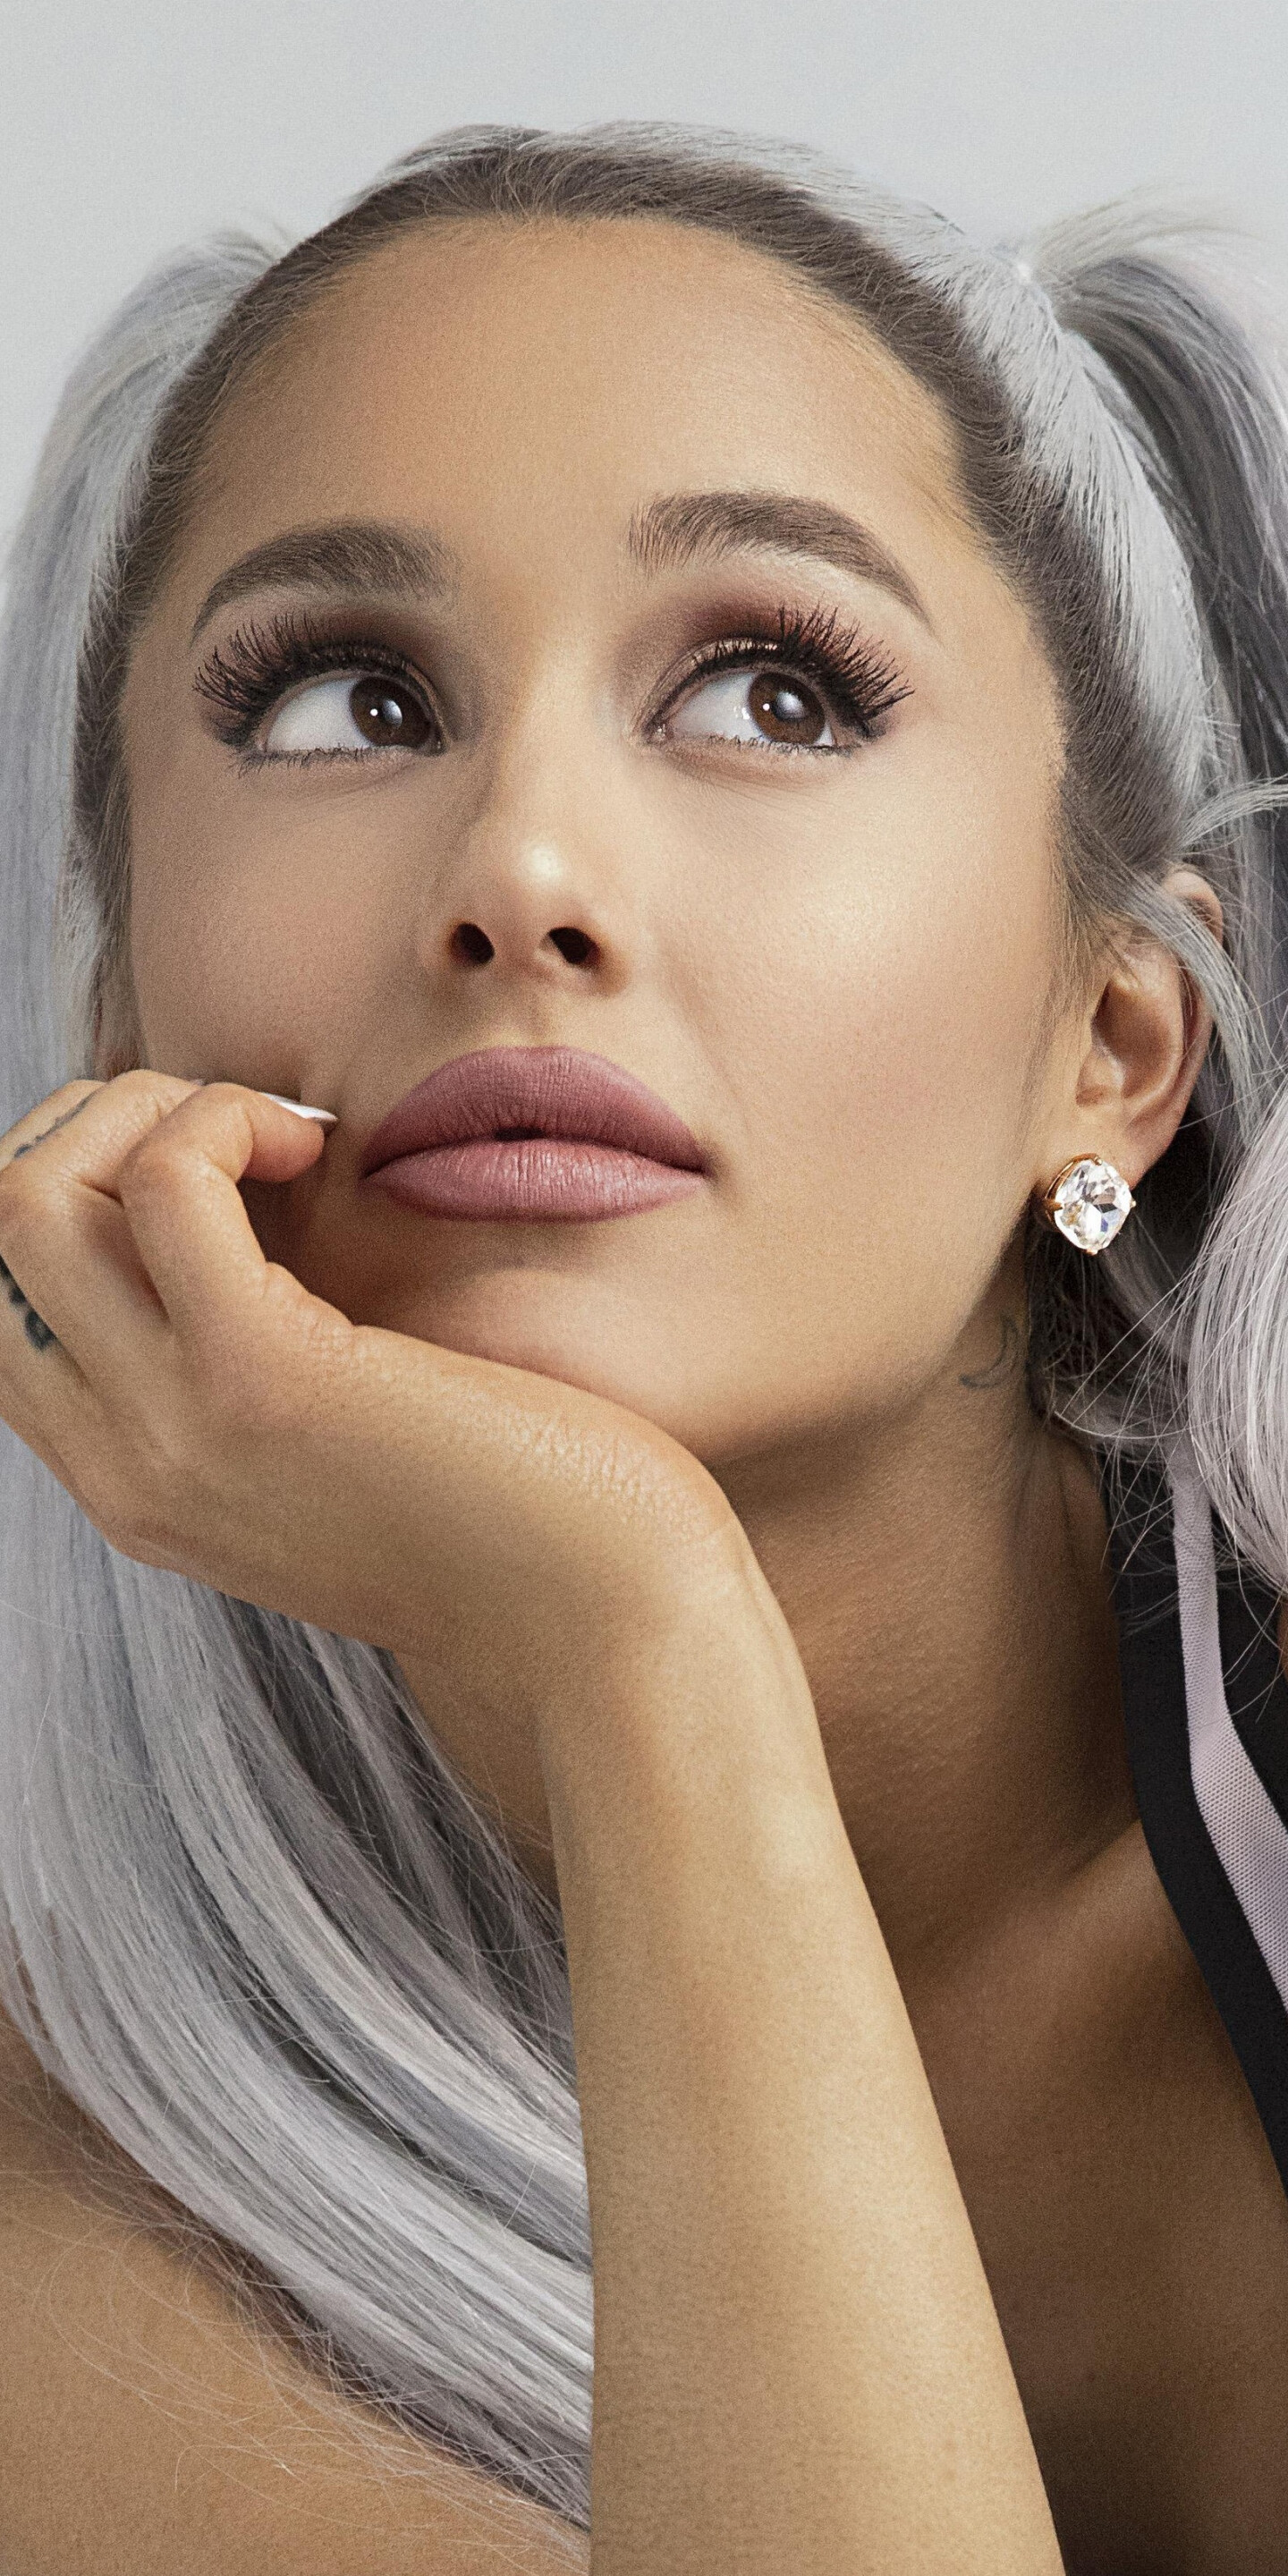 Ariana Grande: The single, “Problem”, Peaked at number two on the Billboard Hot 100. 1440x2880 HD Wallpaper.